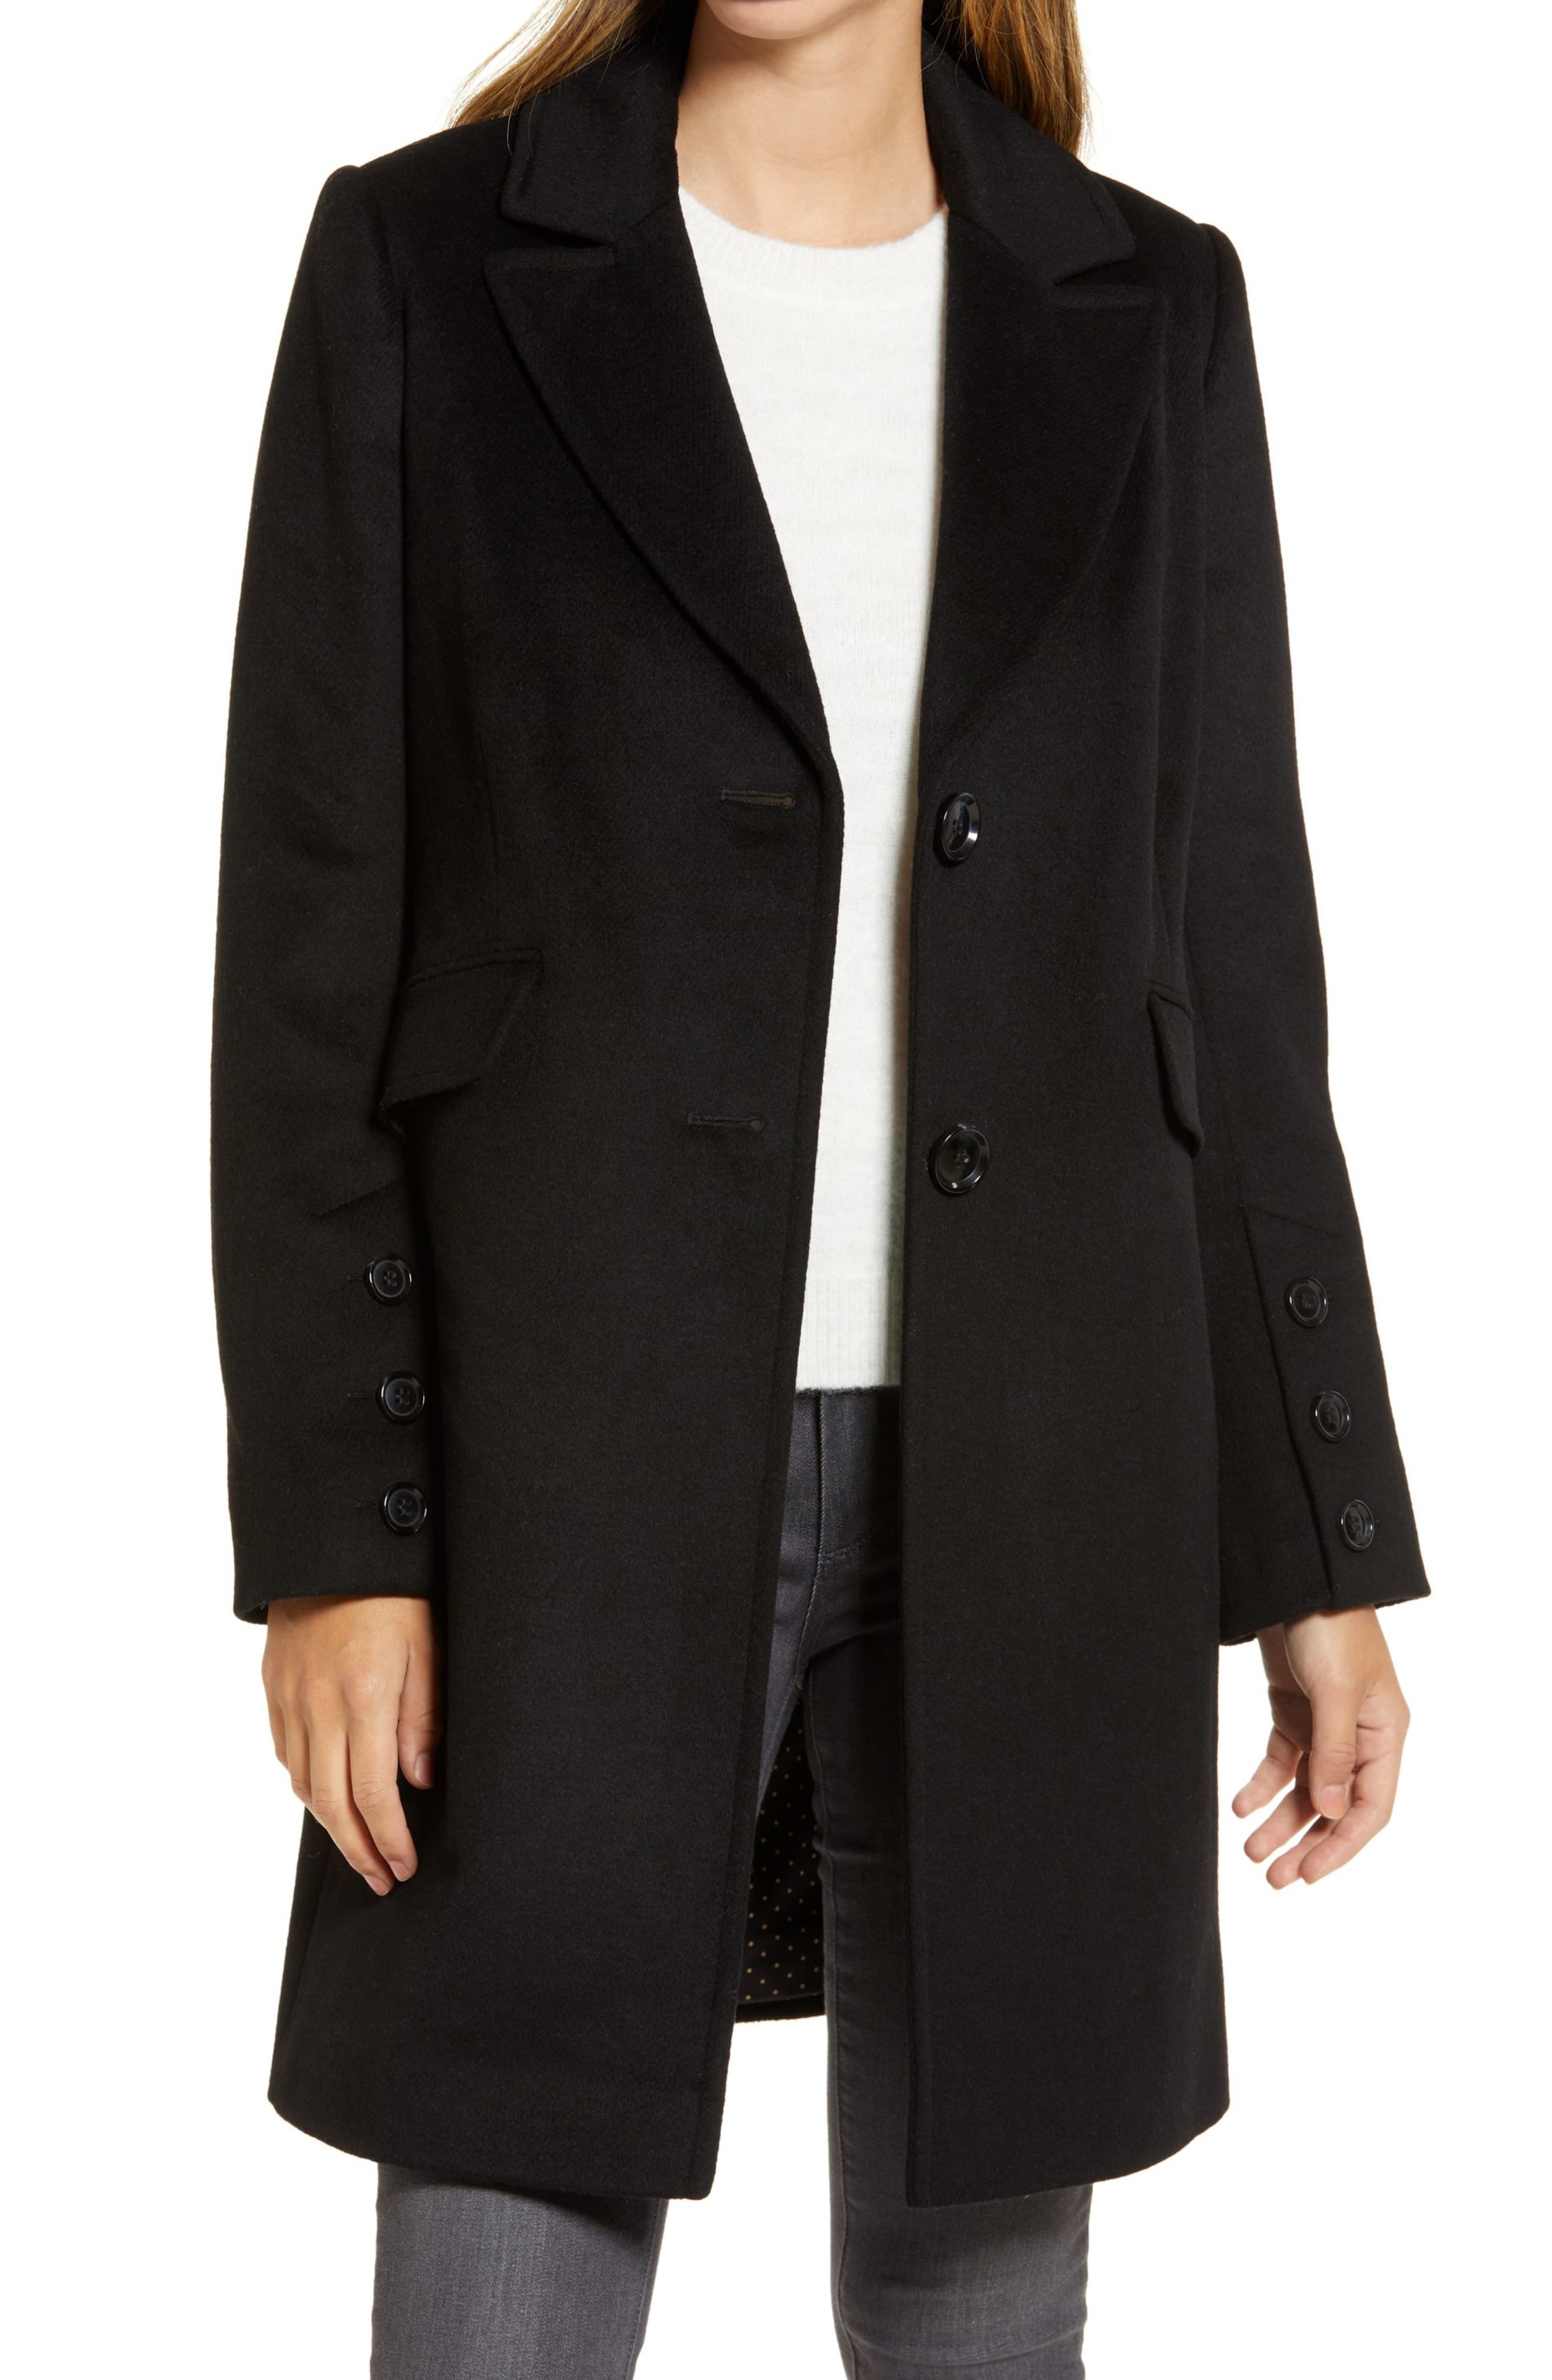 The Best Nordstrom Coat Sale That You Don't Want To Miss Out